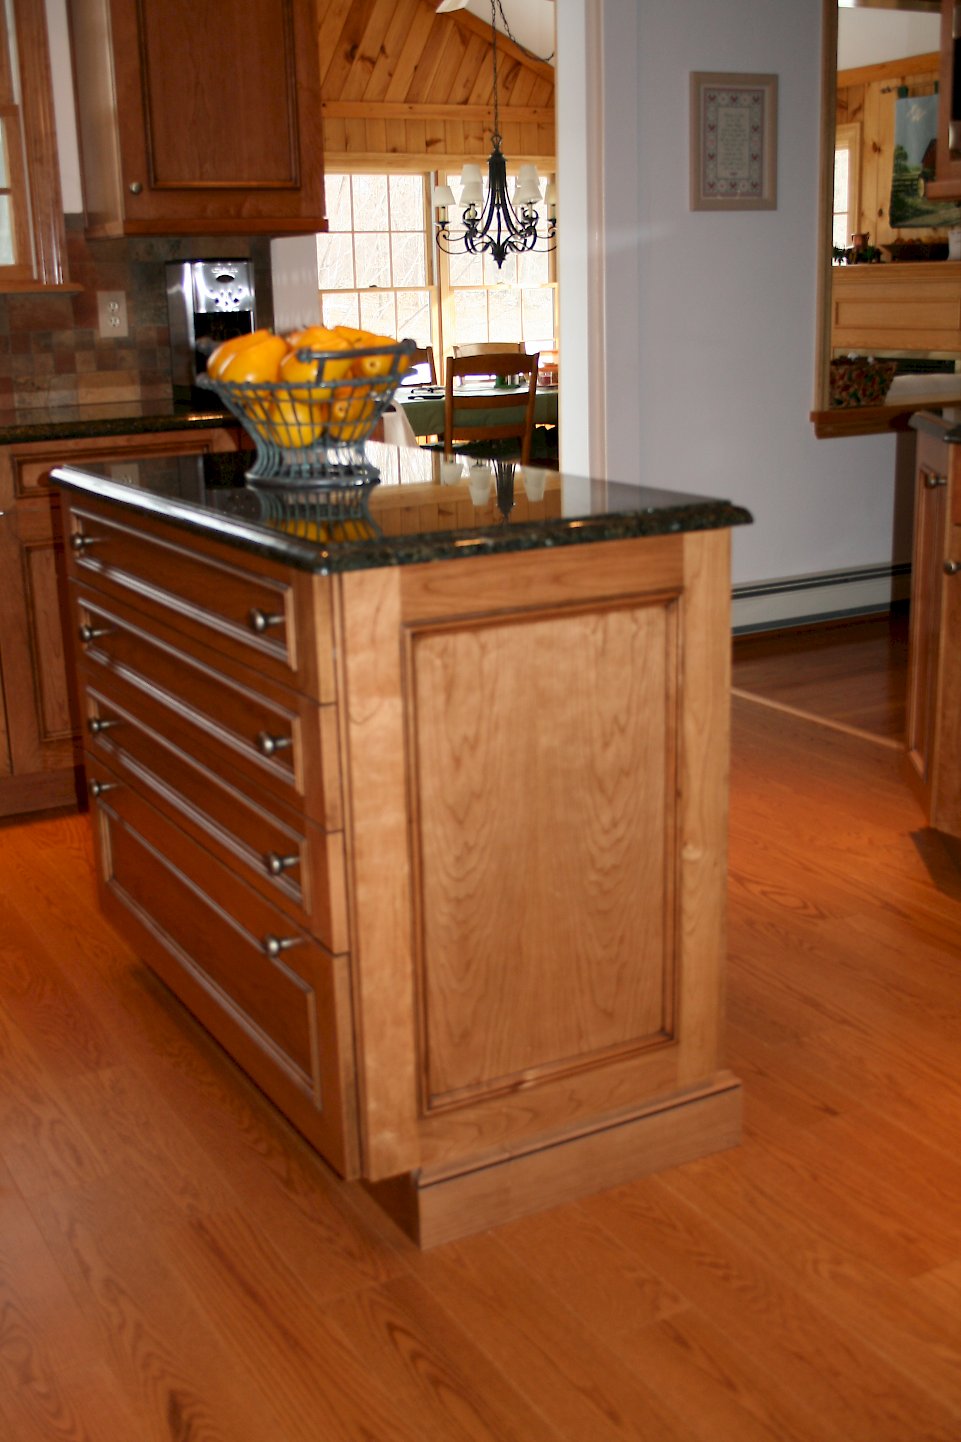 Side view of the kitchen island.